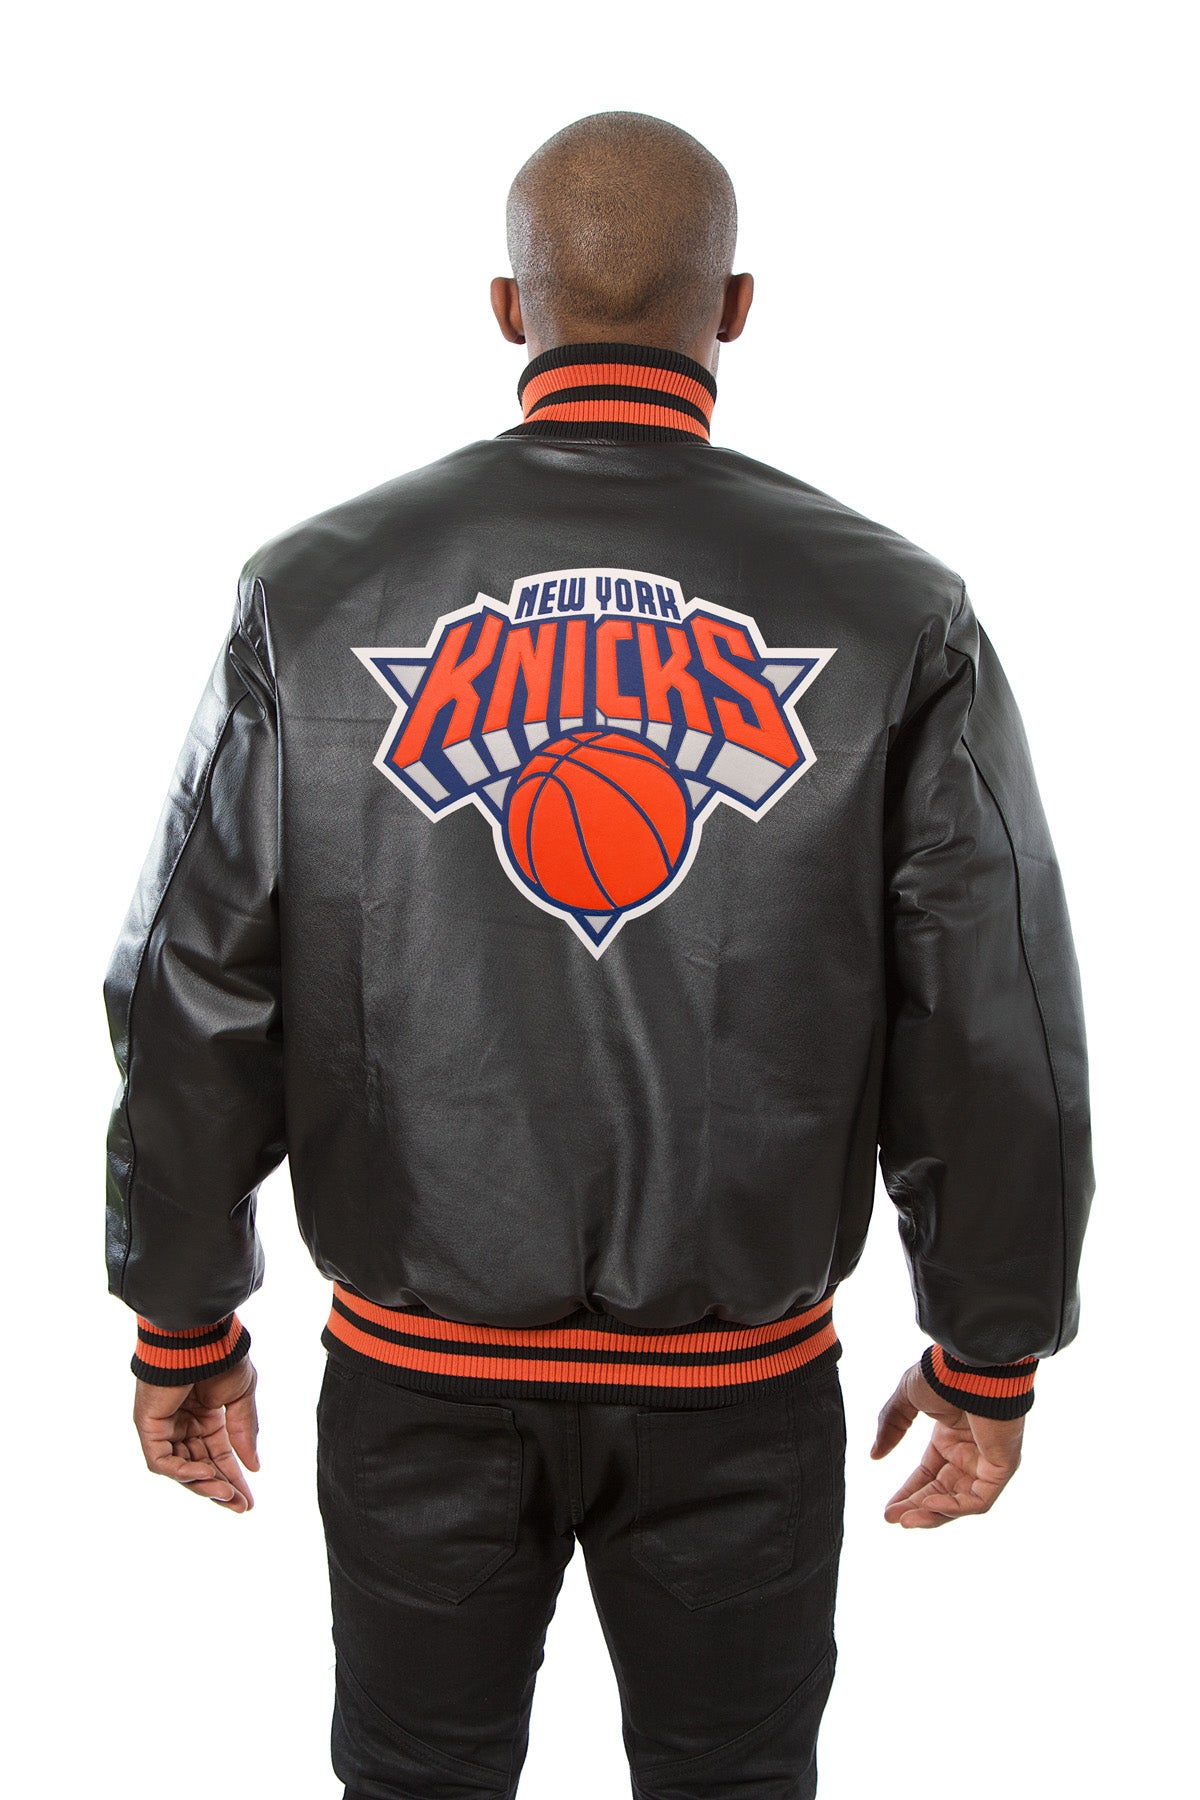 Genuine, Leather Knicks Jacket, for Sale in Port St. Lucie, FL - OfferUp